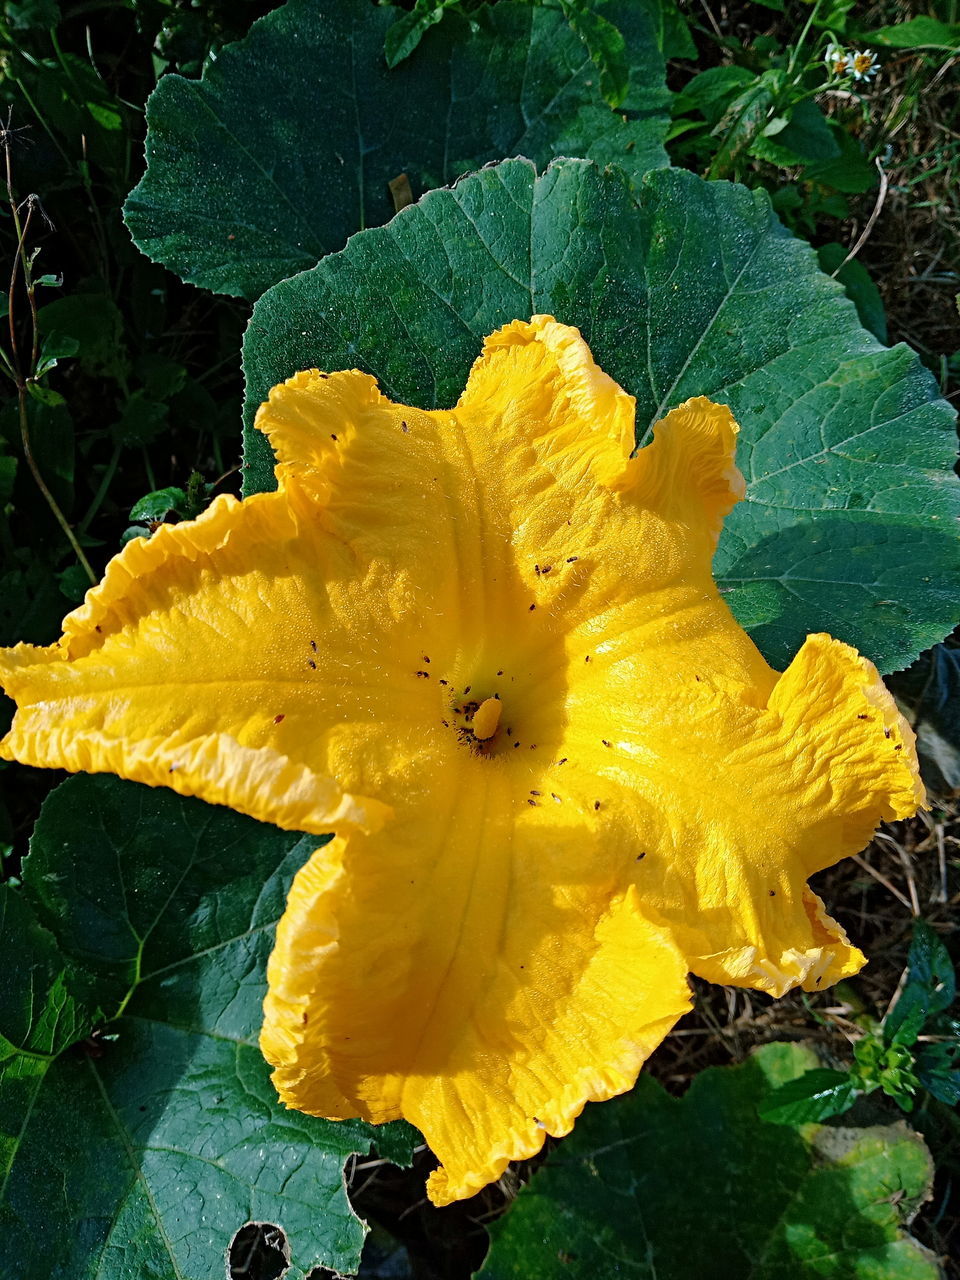 CLOSE-UP OF YELLOW FLOWER ON PLANT